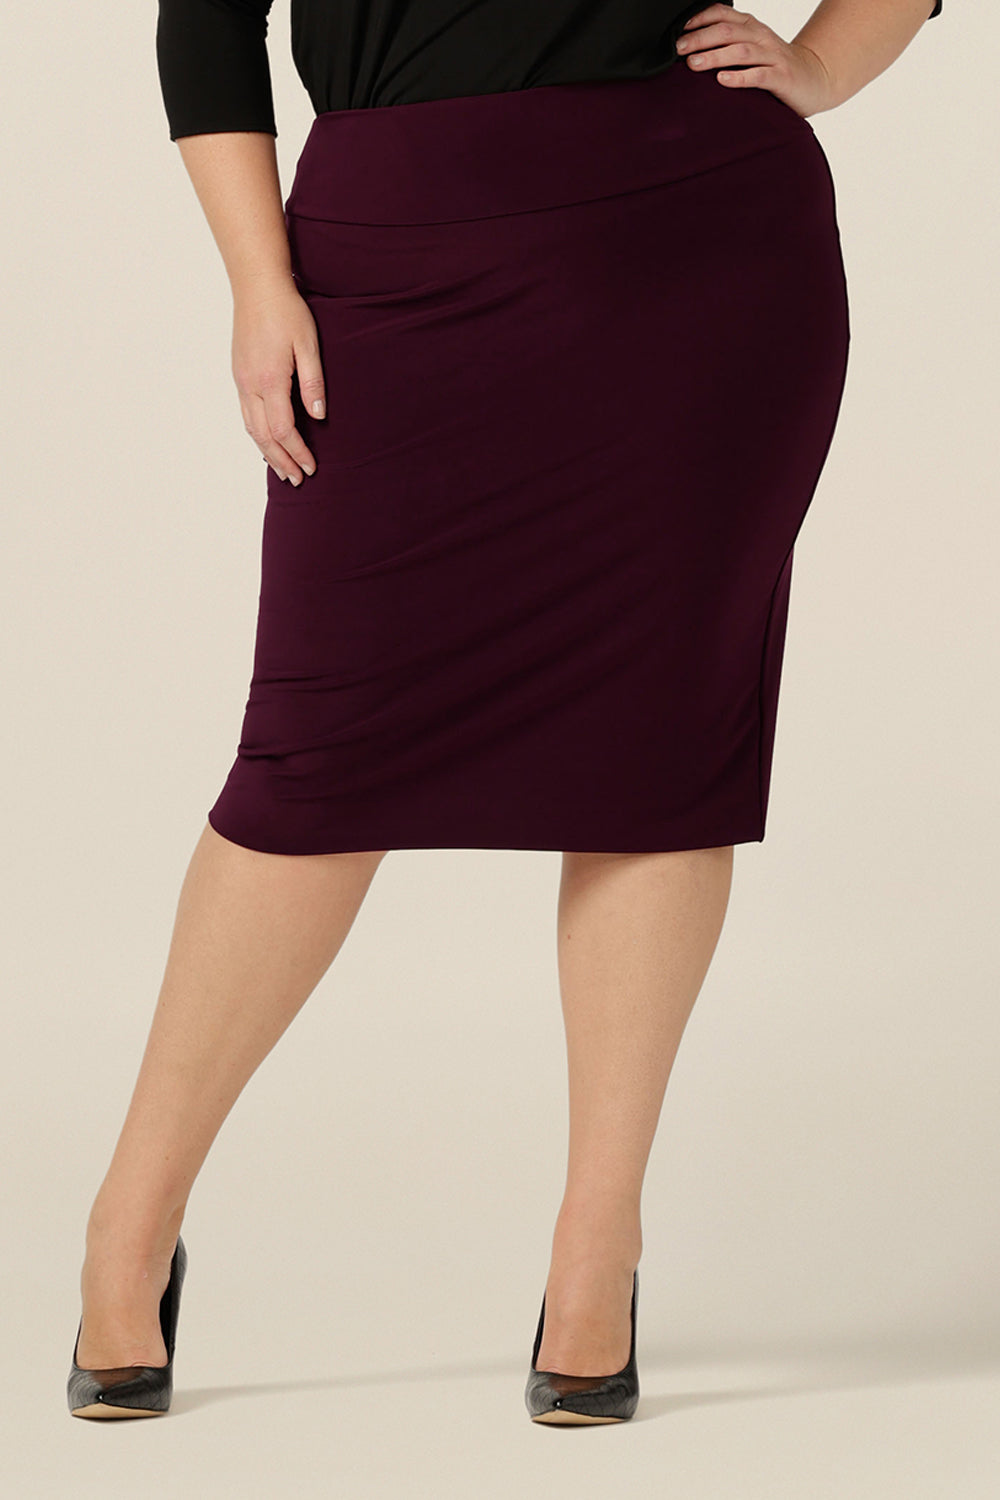 A size 18, plus size woman wears a knee-length tube skirt in Mulberry stretch jersey. A workwear pencil skirt, the stretch fabric makes for a comfortable skirt for all-day corporate wear.